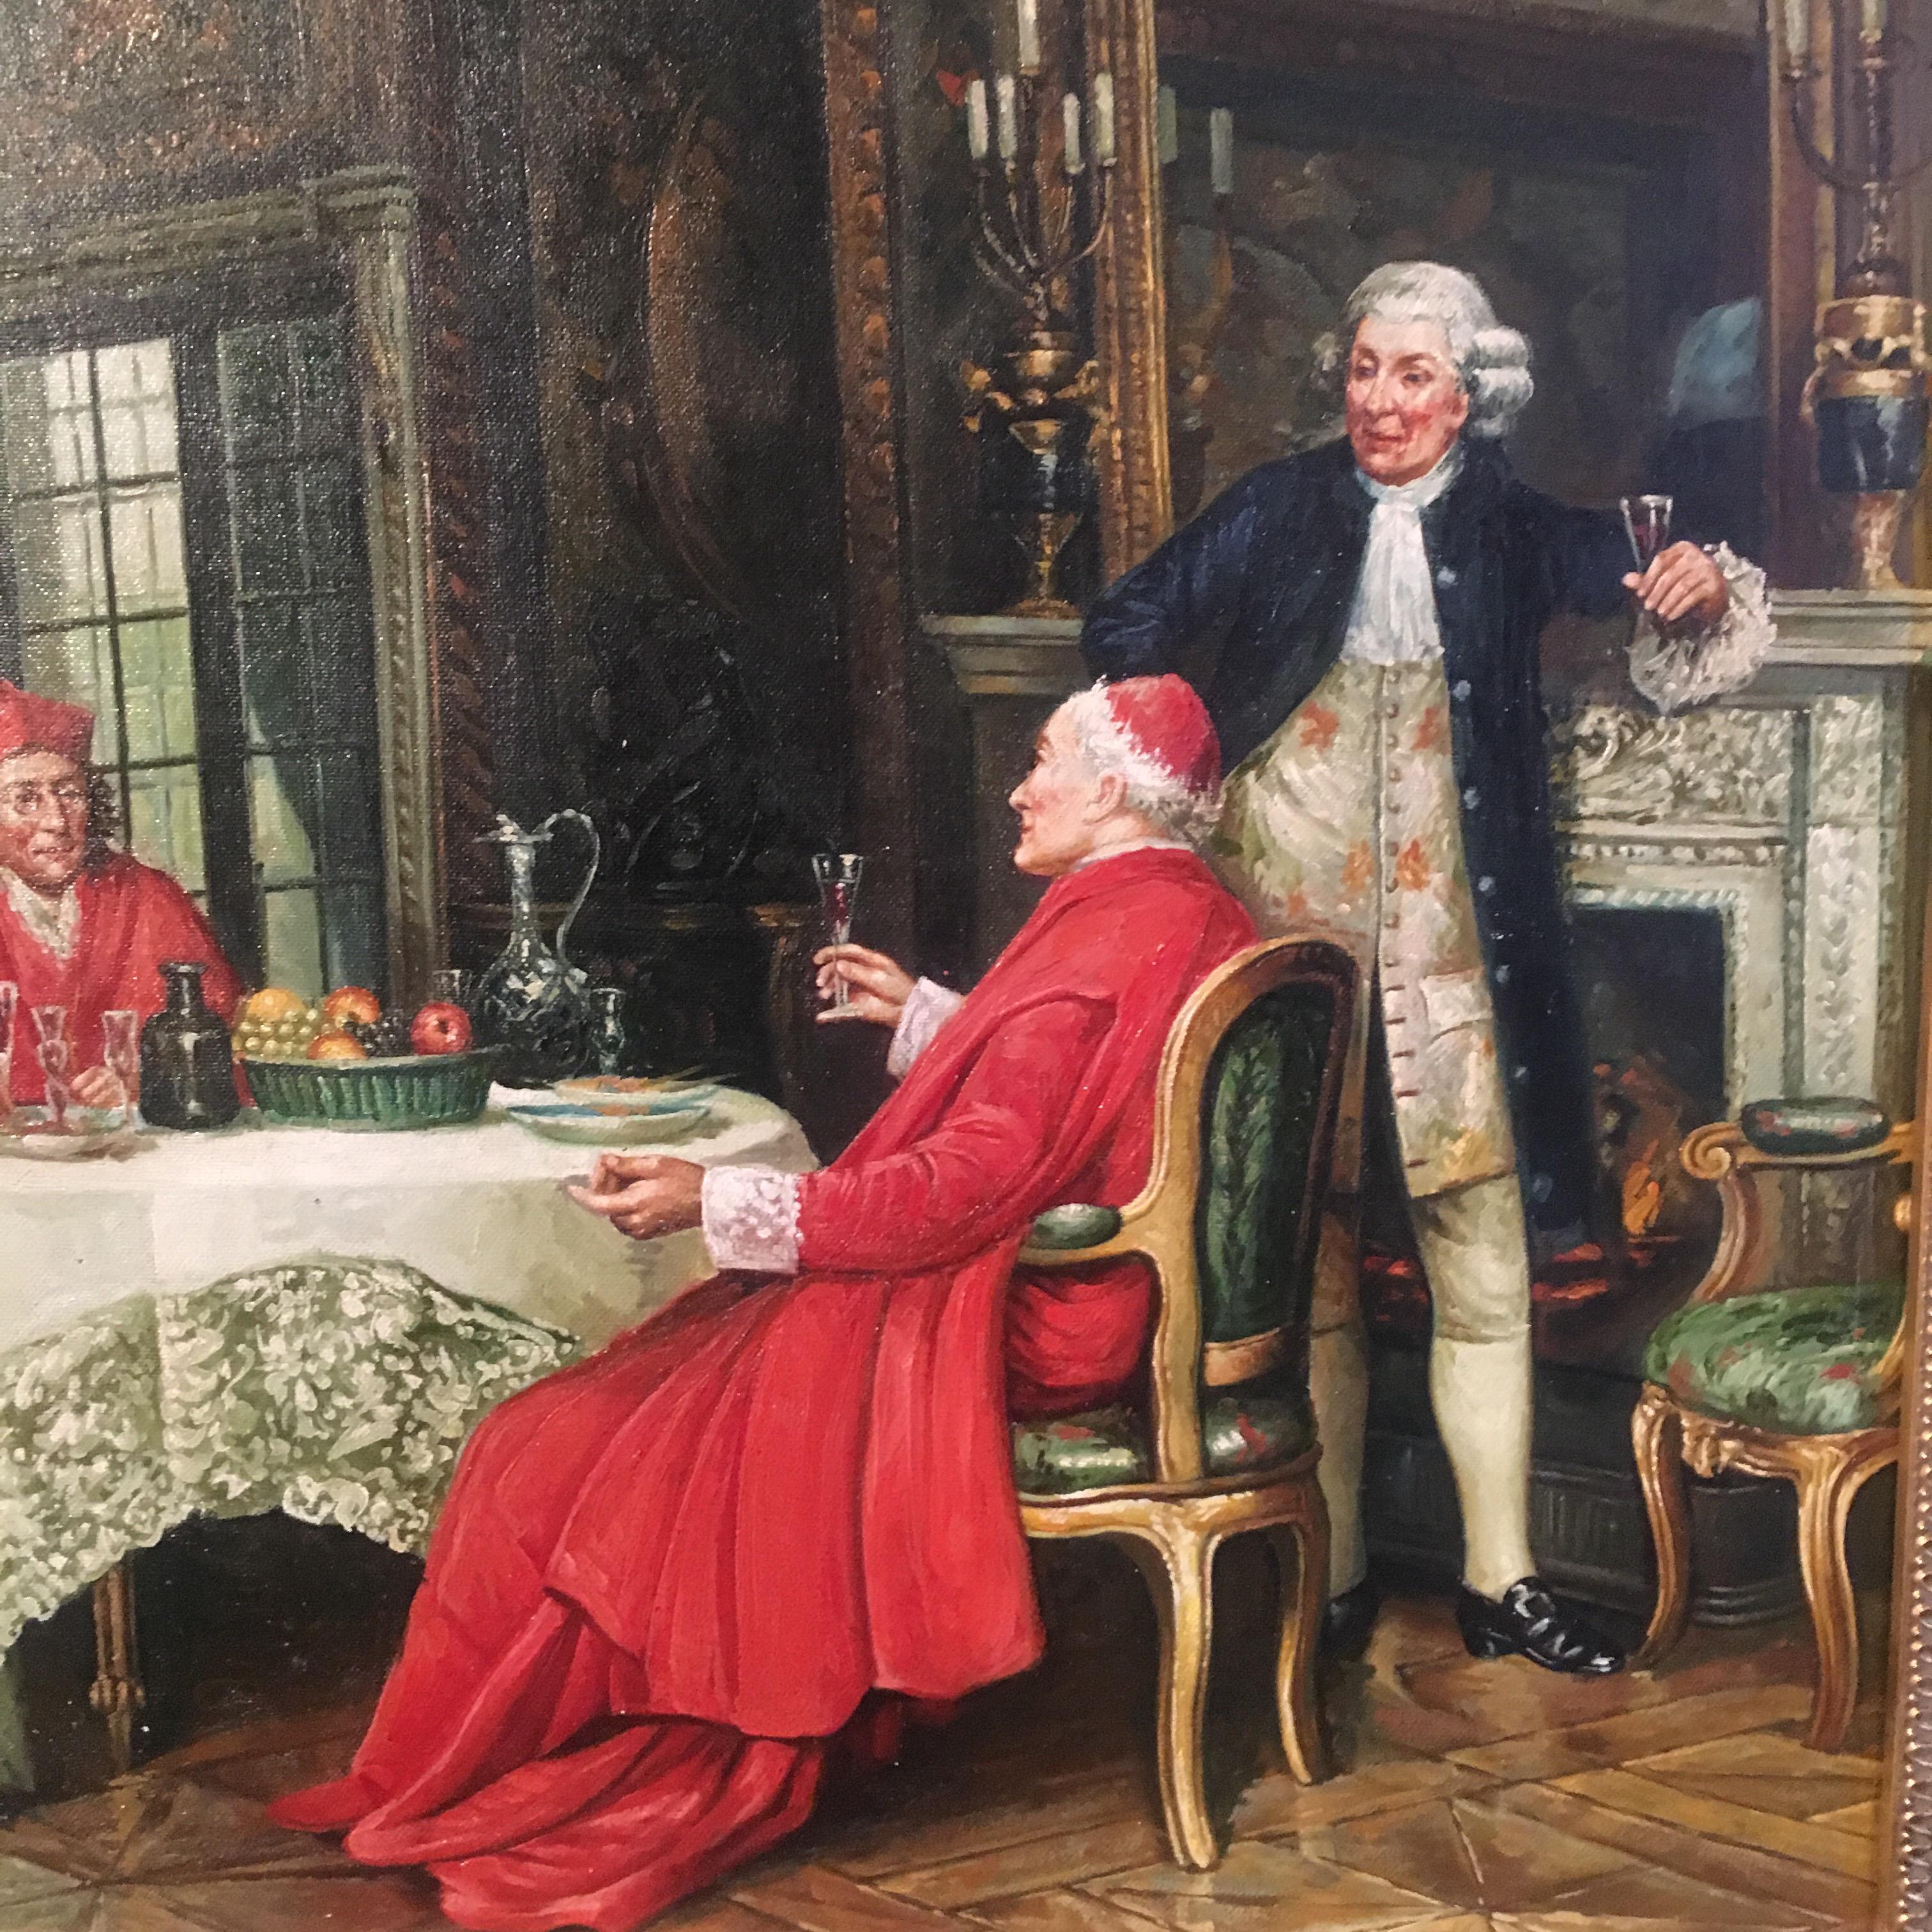 Meeting of the Minds, Large Portrait of Italian Cardinals, Oil Painting 1